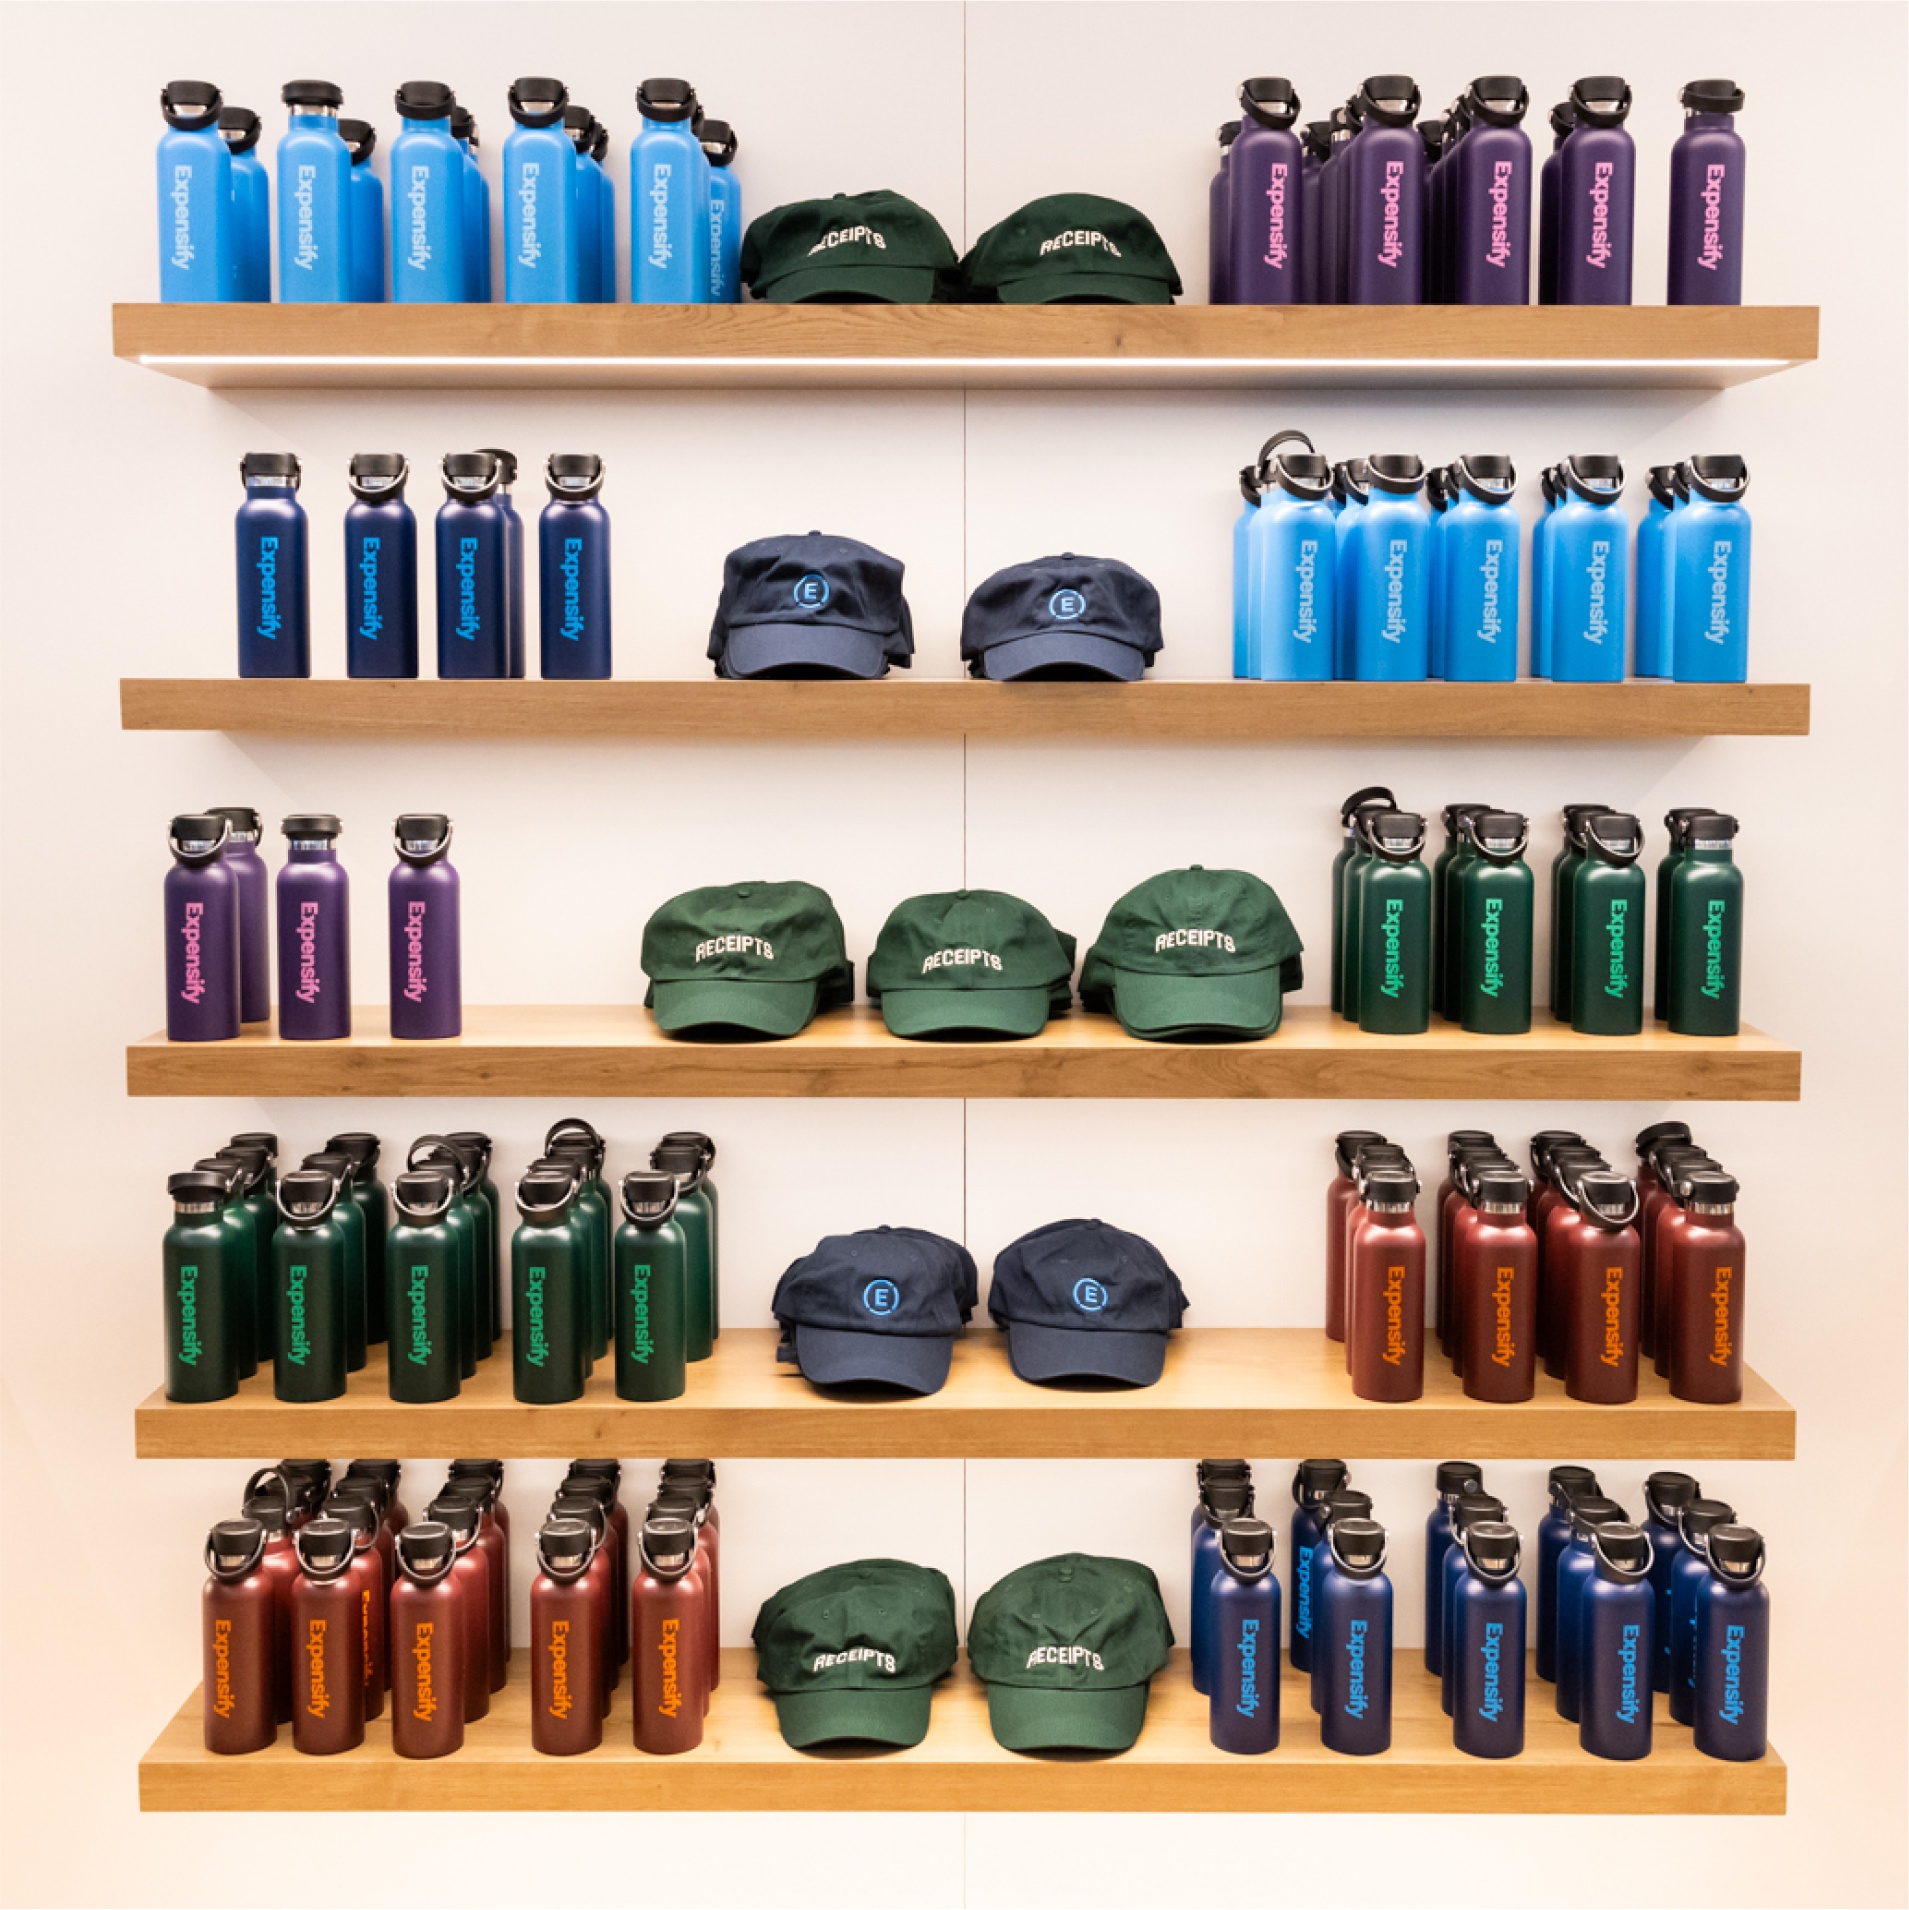 A display of Expensify branded water bottles and hats on a shelf.